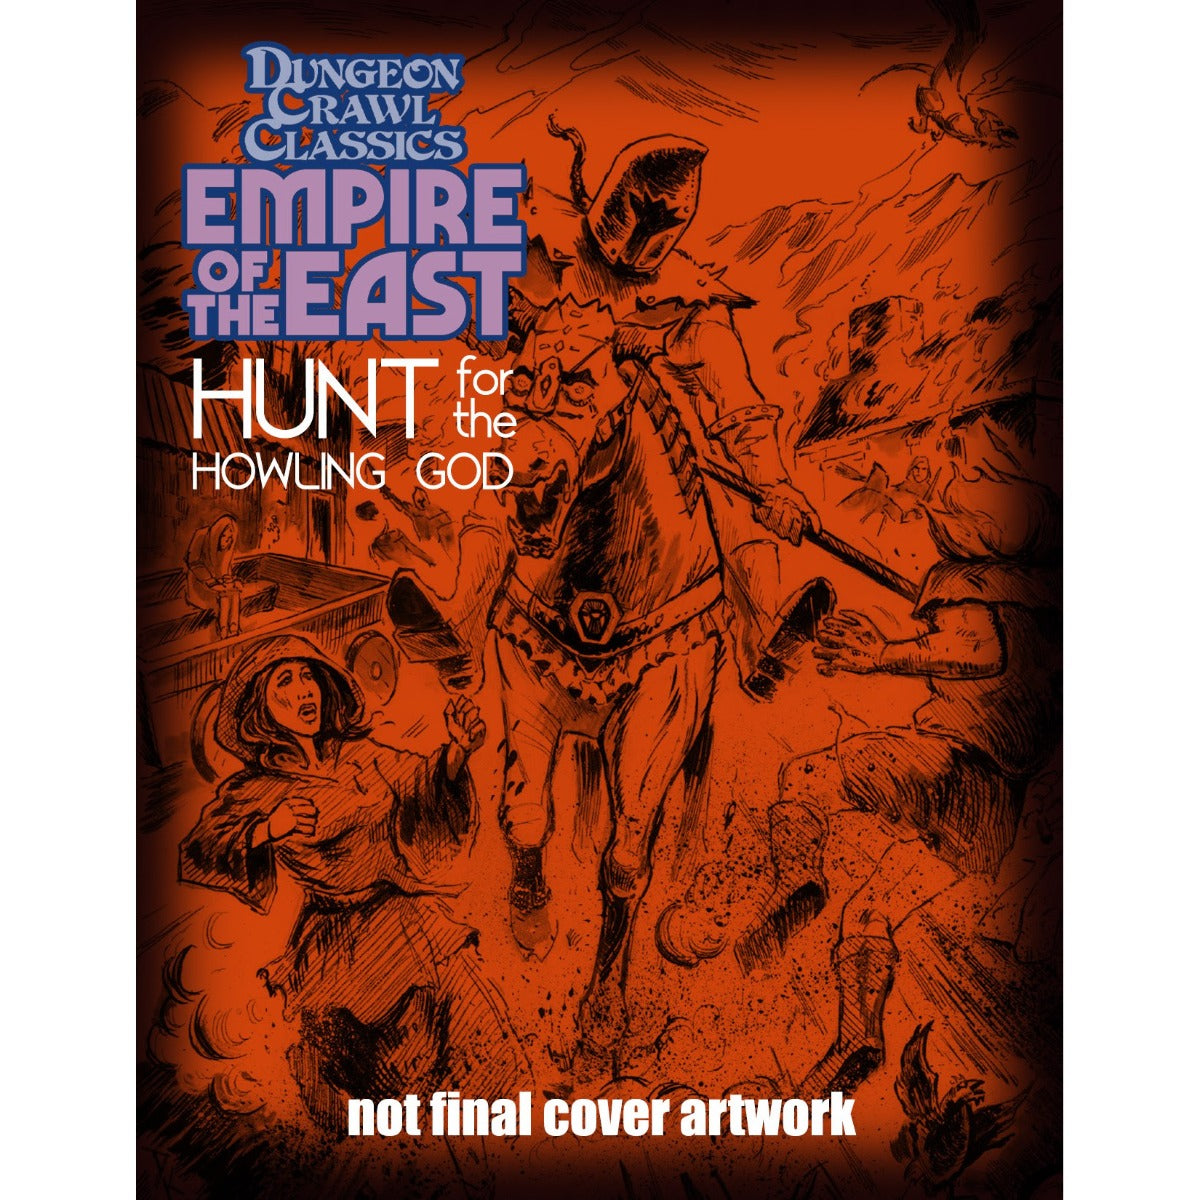 Dungeon Crawl Classics Empire of the East #1 - Hunt For the Howling God